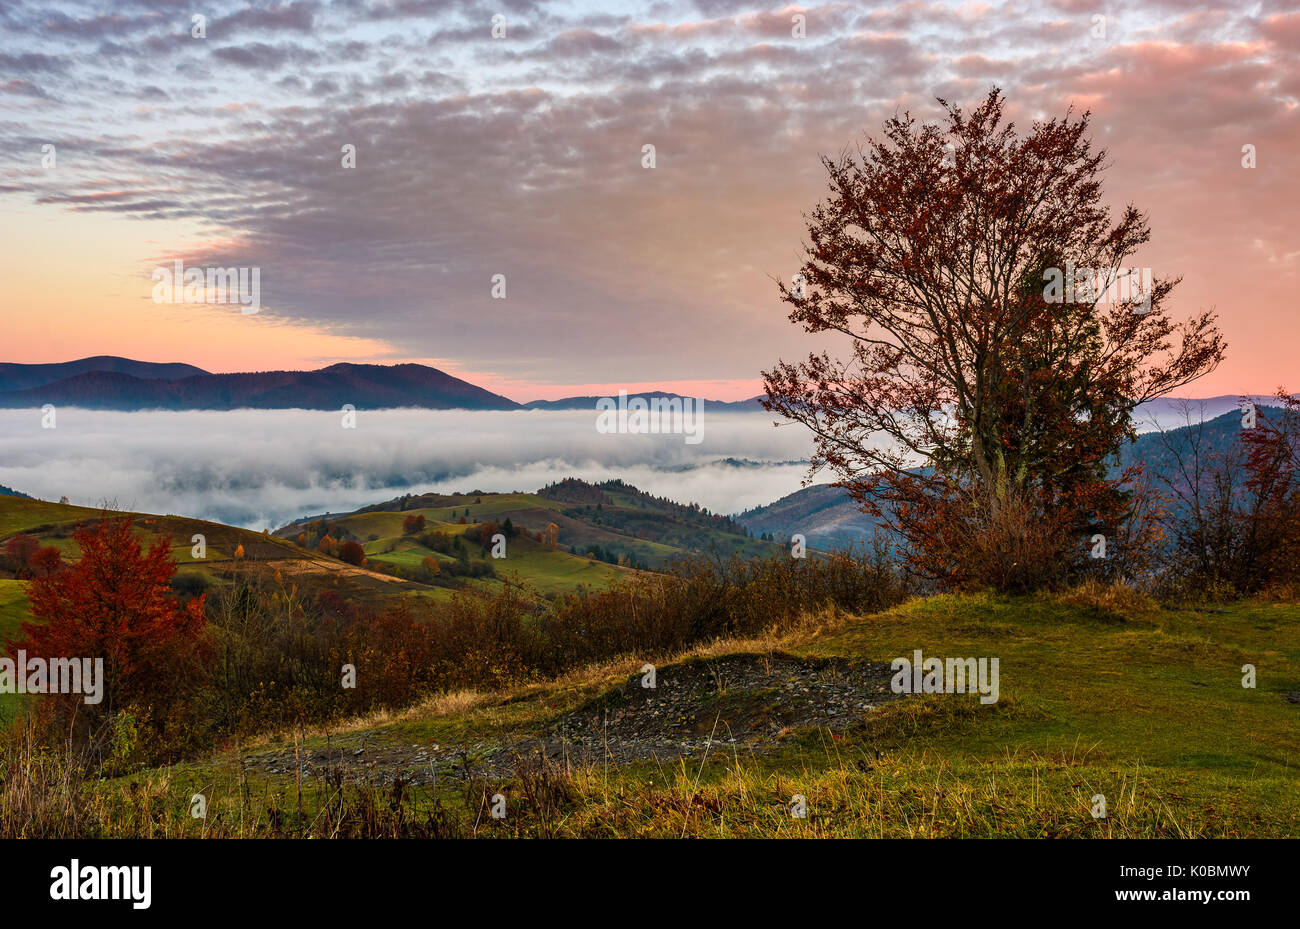 tree on a hump above the ridge and fog at sunrise. exquisite autumnal scenery in mountainous countryside landscape Stock Photo